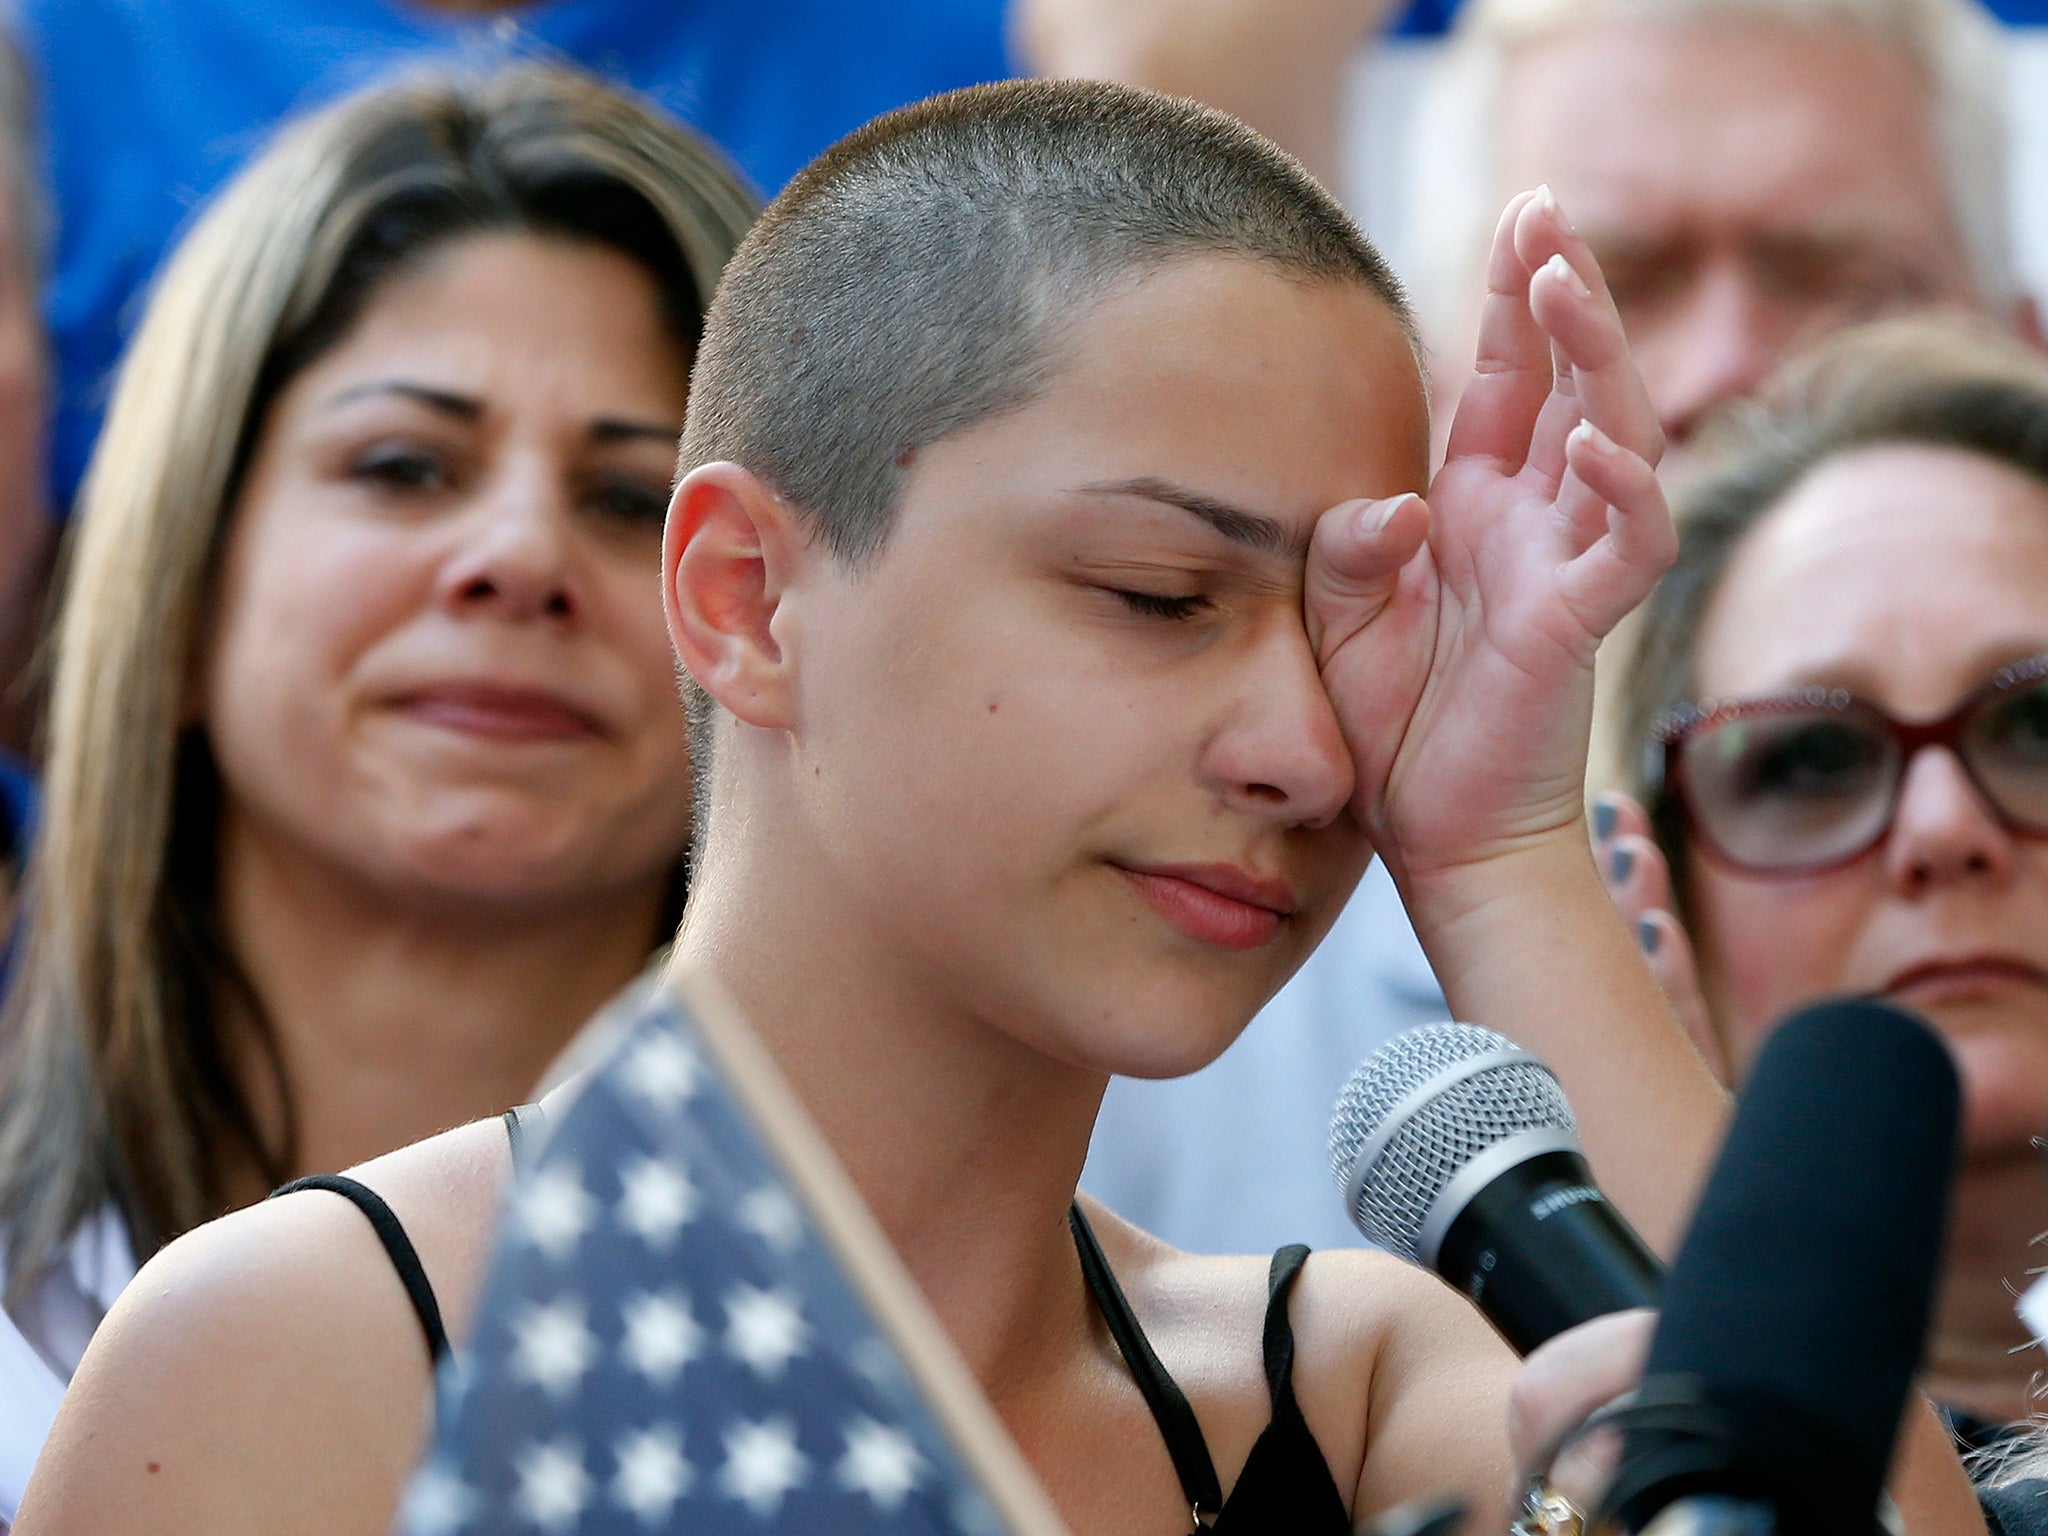 Emma Gonzalez speaks at a rally for gun control at the Broward County Federal Courthouse in Fort Lauderdale, Florida, three days after the Parkland shooting (AFP/Getty)